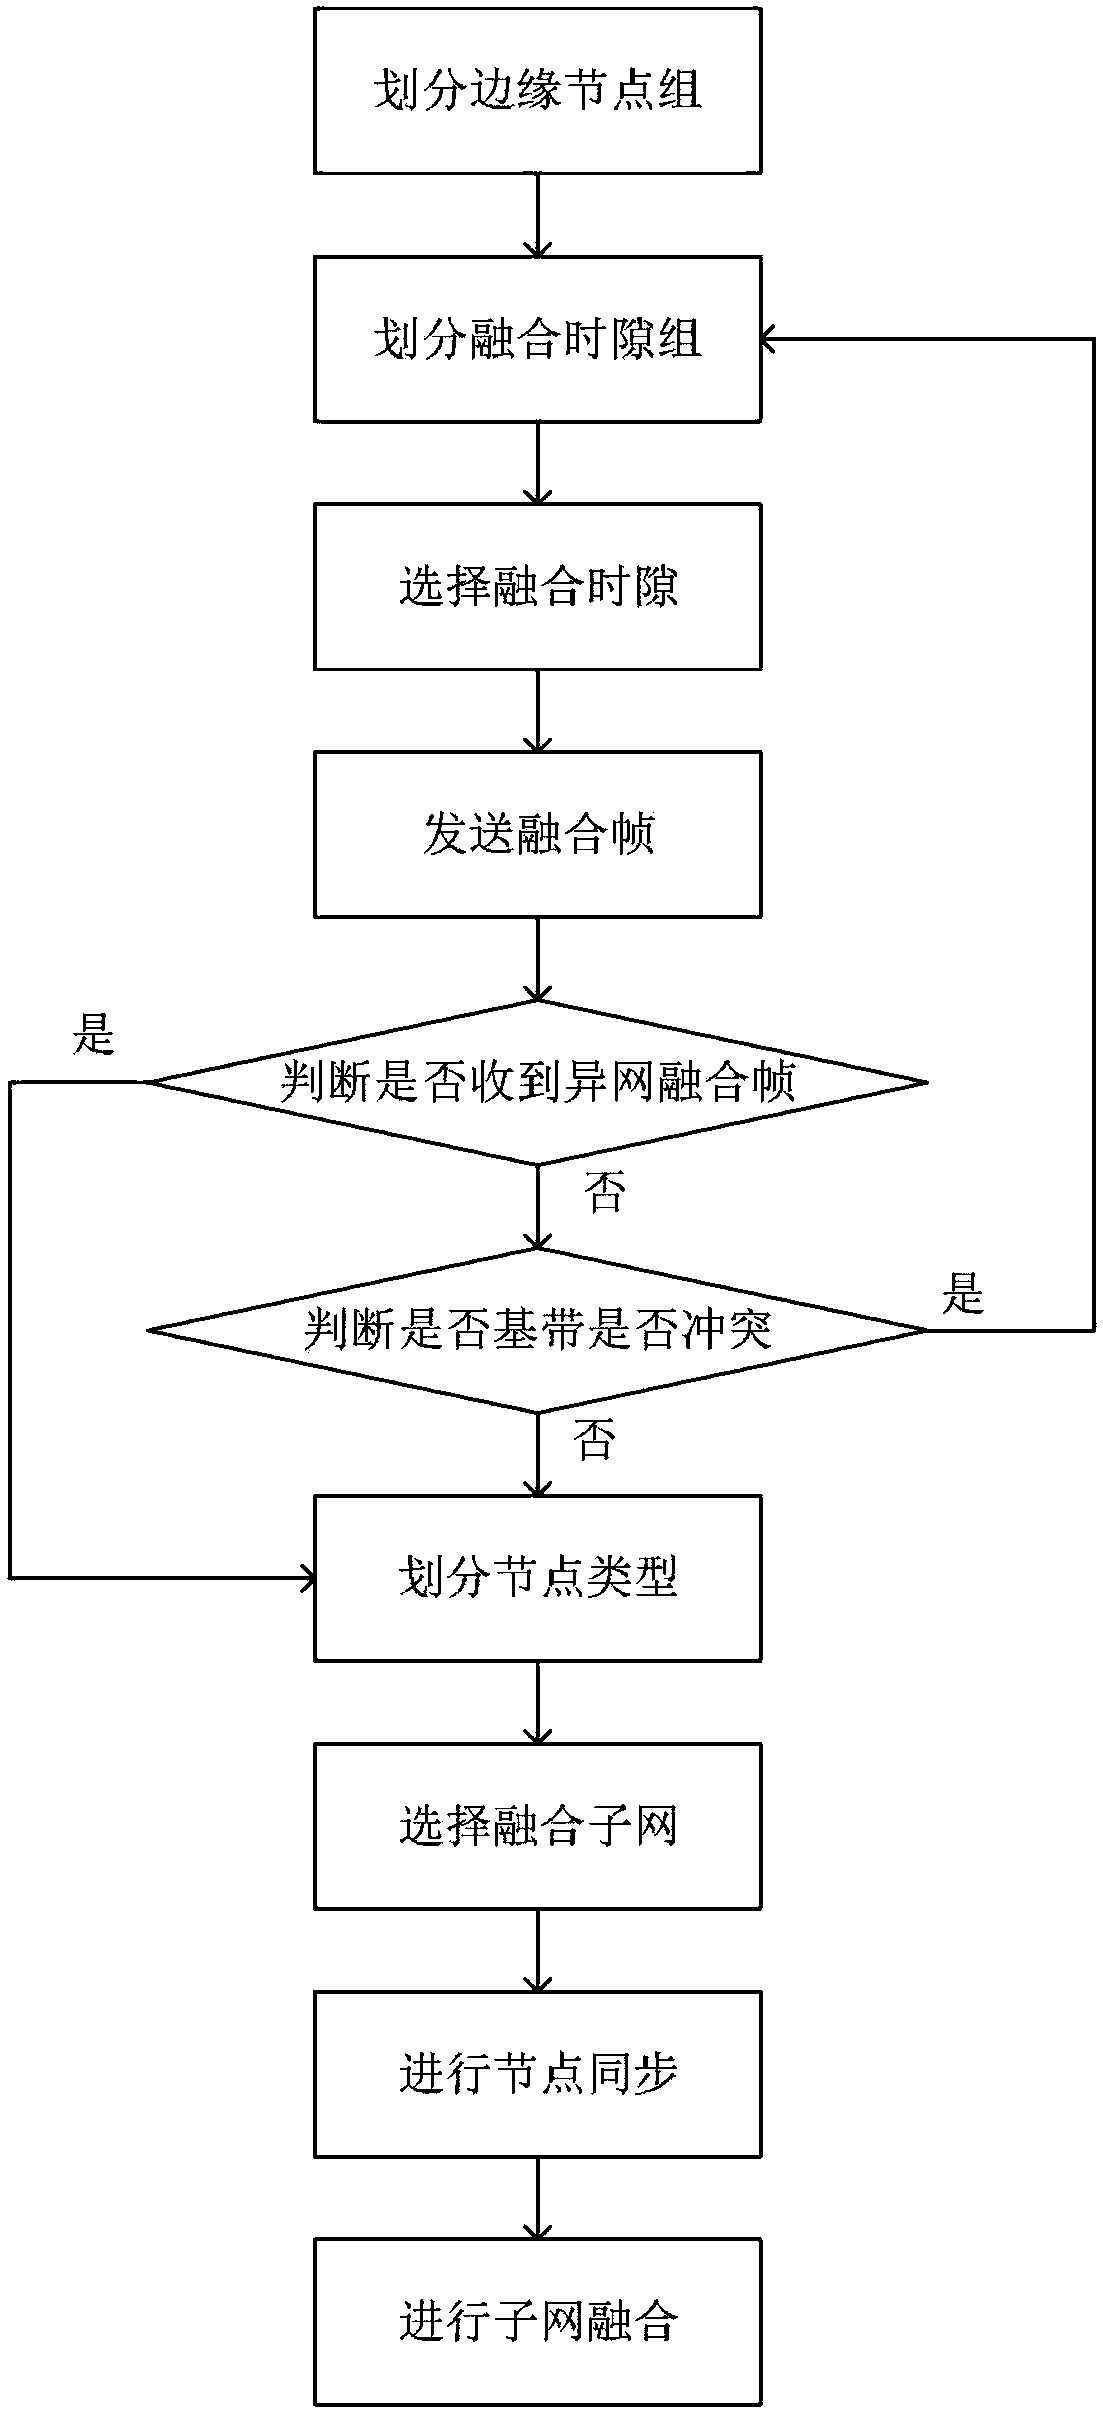 Subnet Convergence Method for Single Channel Time Division Multiple Access Ad Hoc Network